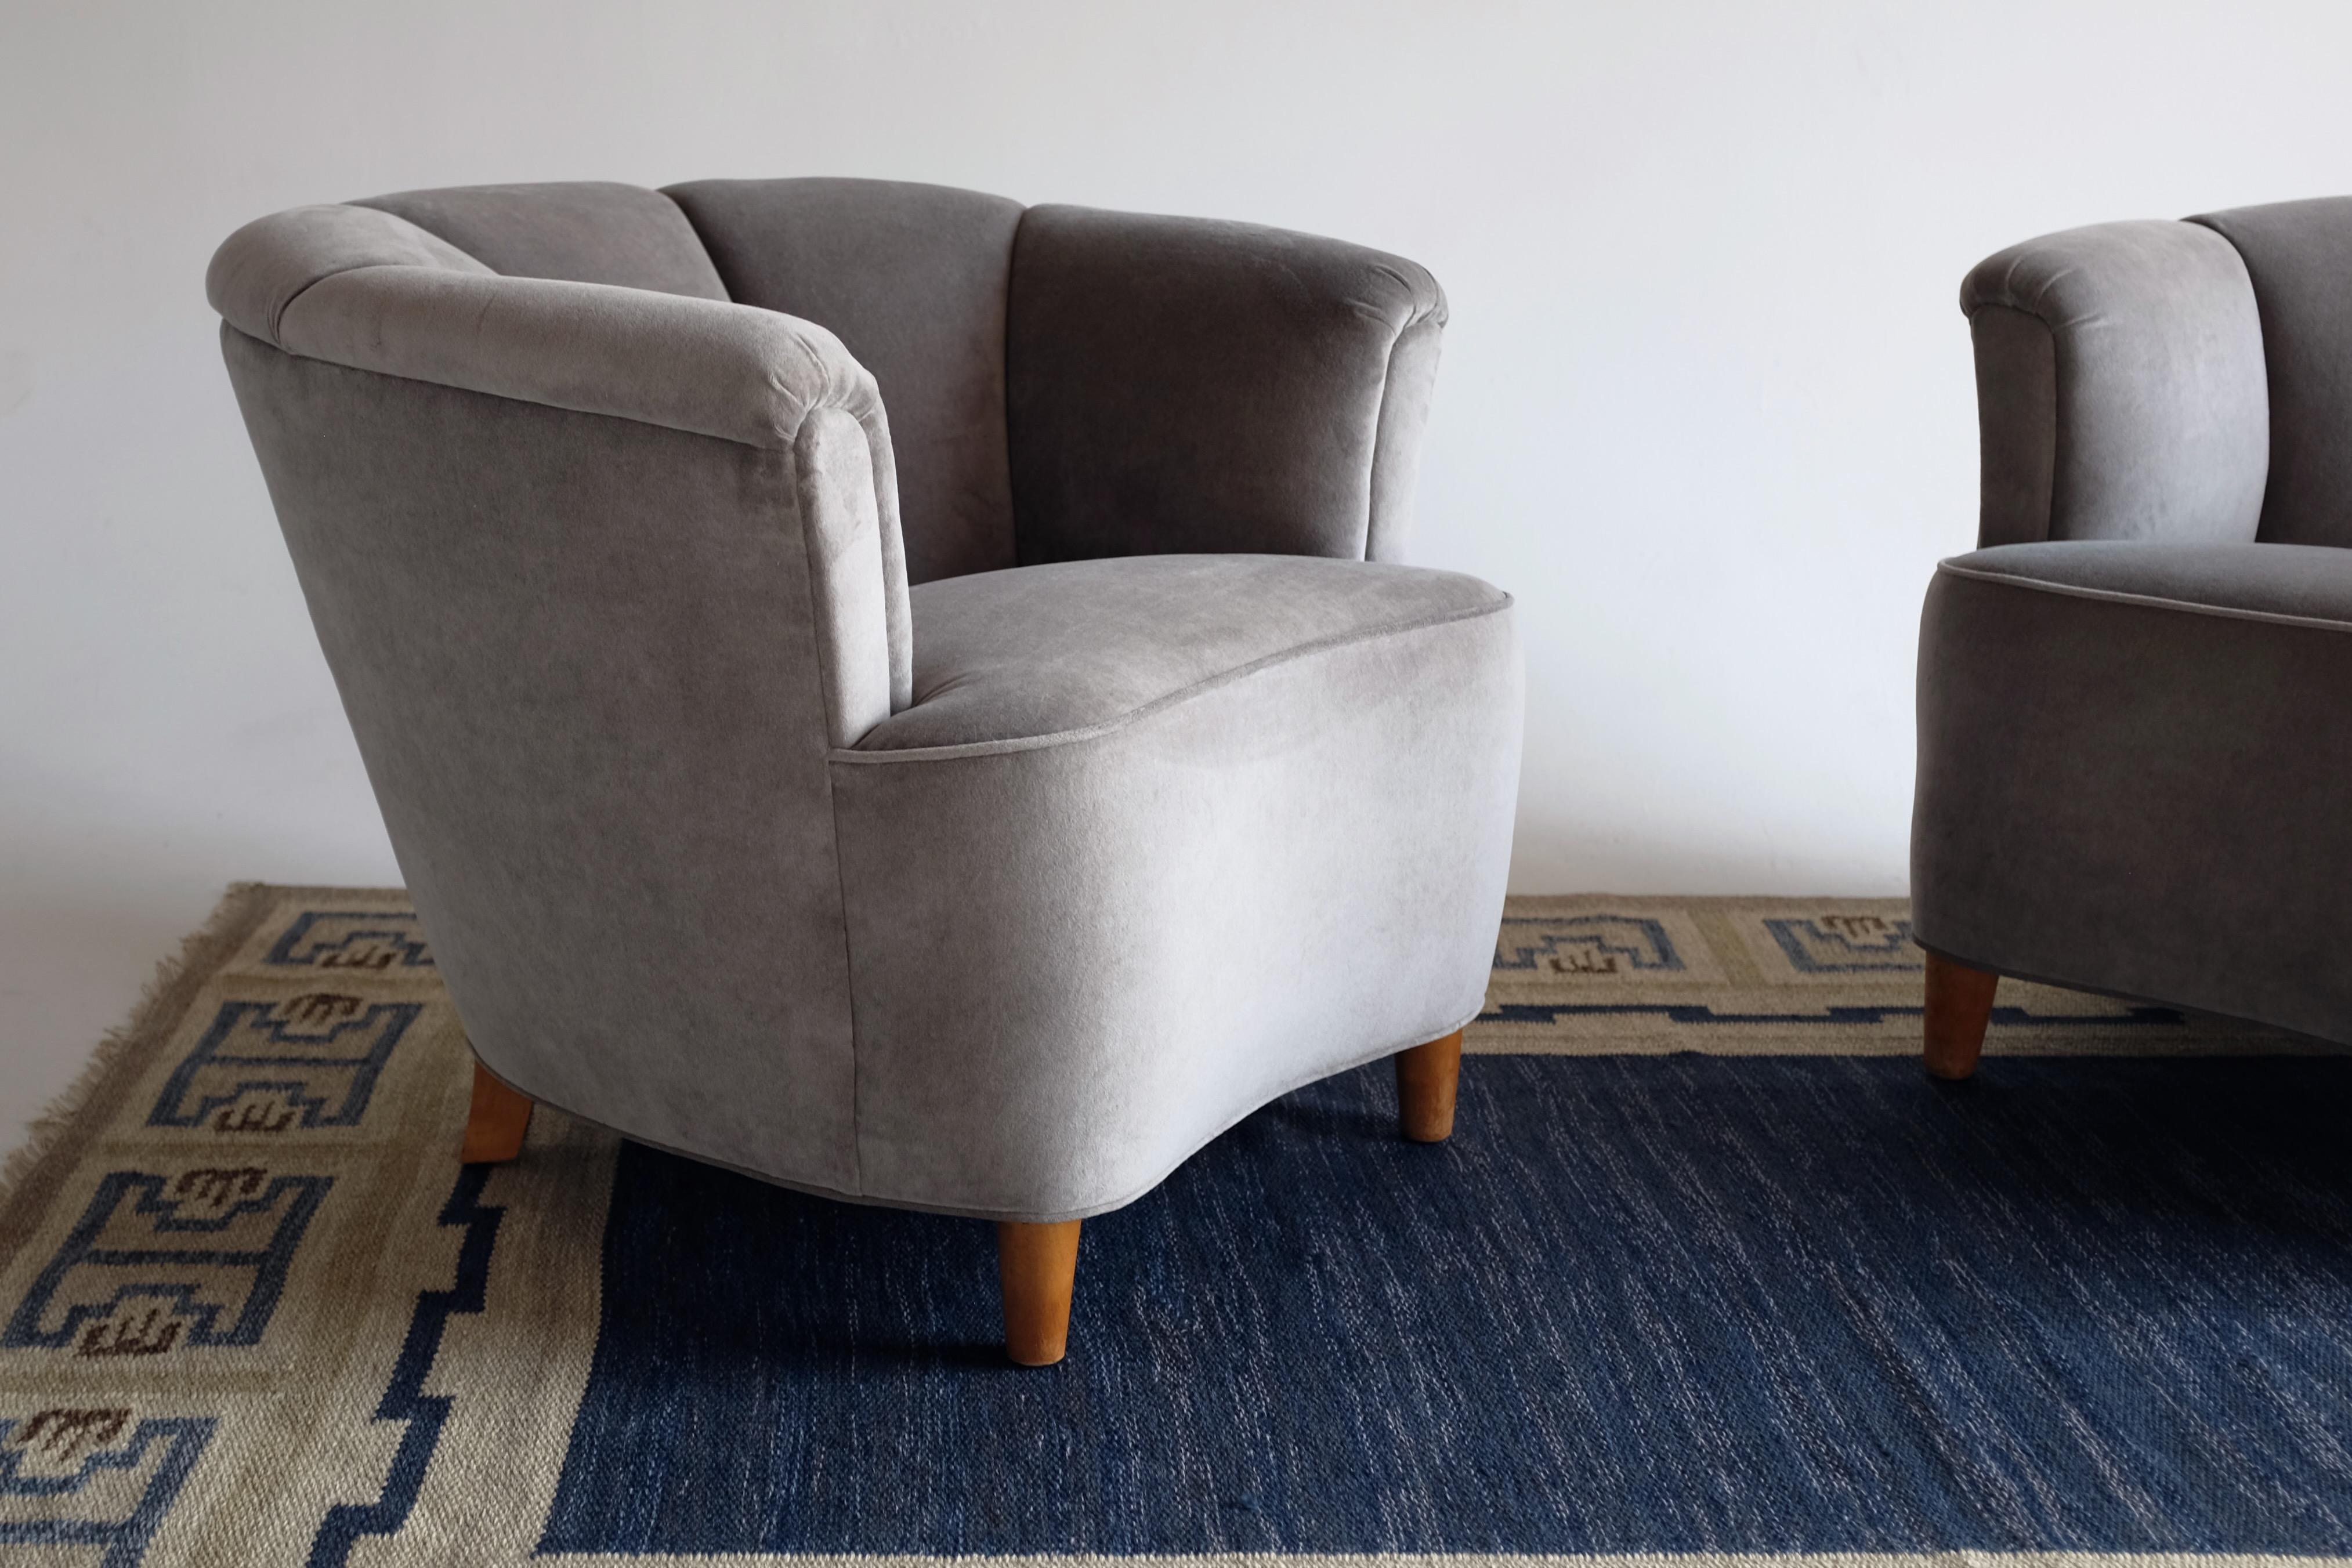 Mid-20th Century Pair of Swedish Modern Lounge Chairs For Sale